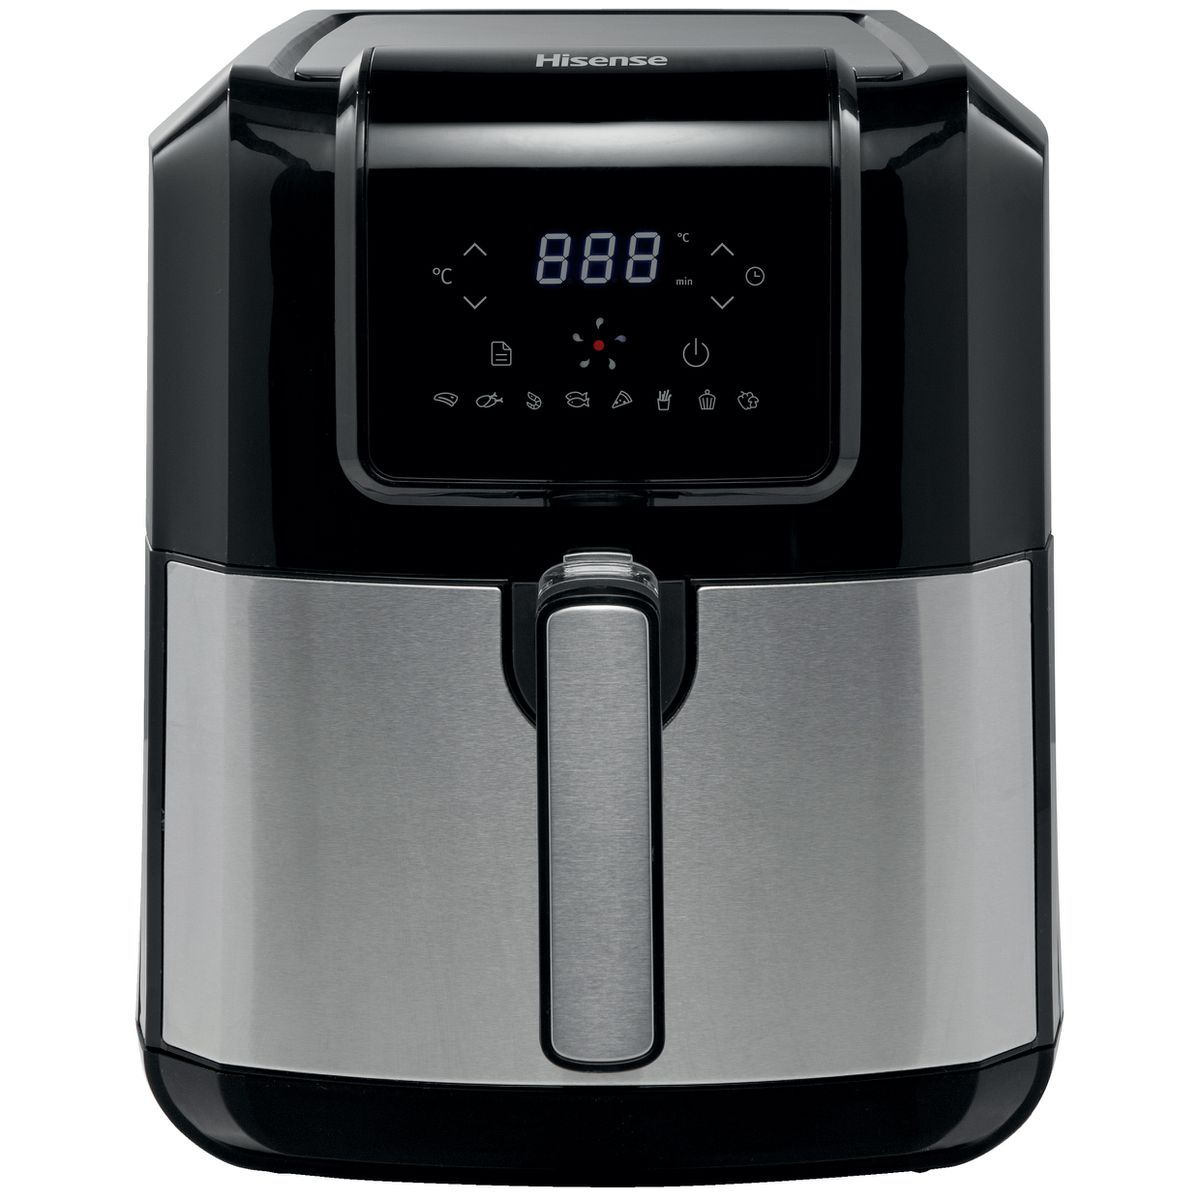 Hisense 6.3L Air Fryer with Digital Touch Control Panel Buy Online in Zimbabwe thedailysale.shop